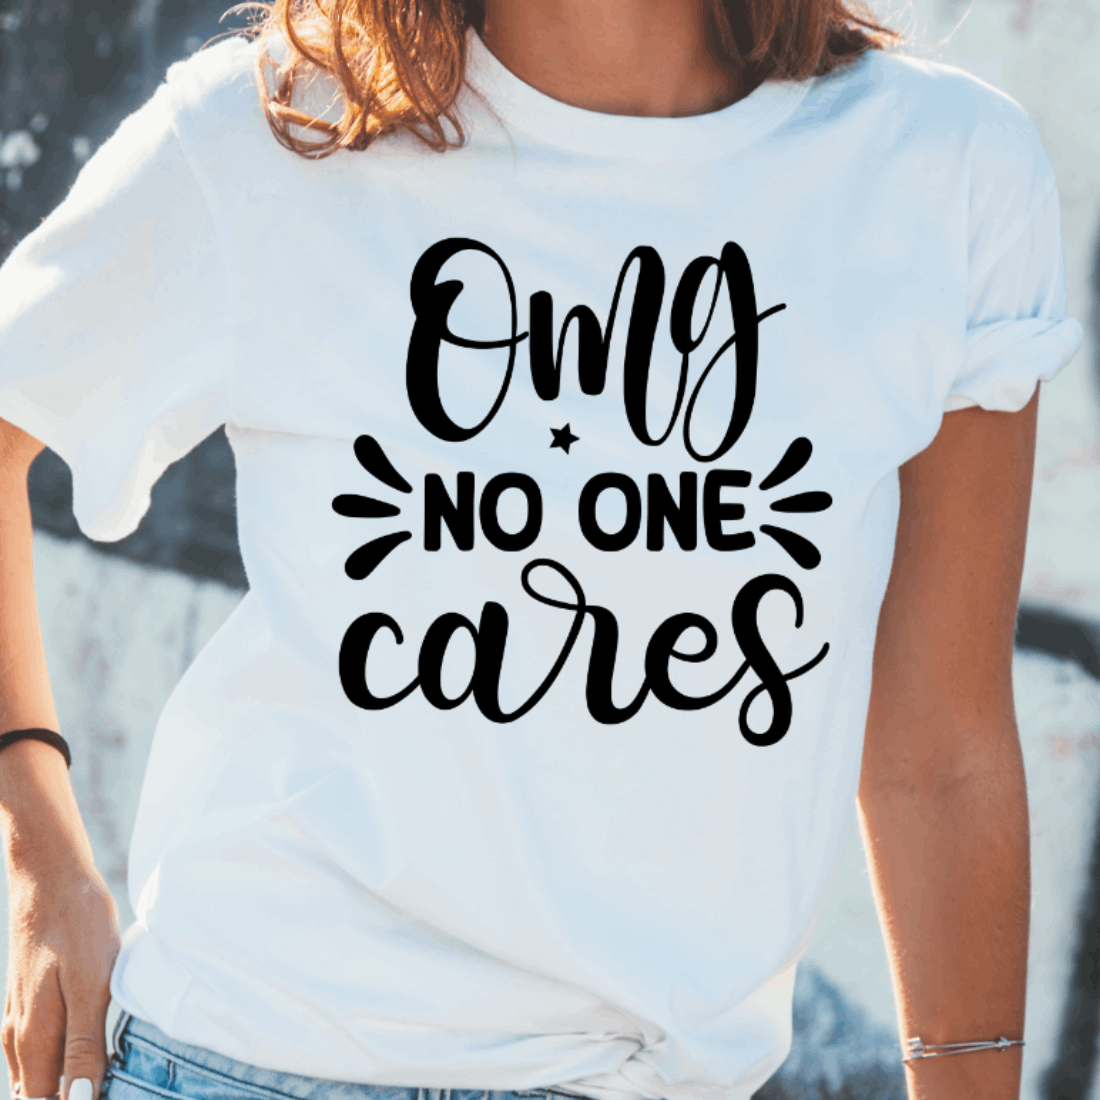 Woman wearing a t - shirt that says one no one cares.